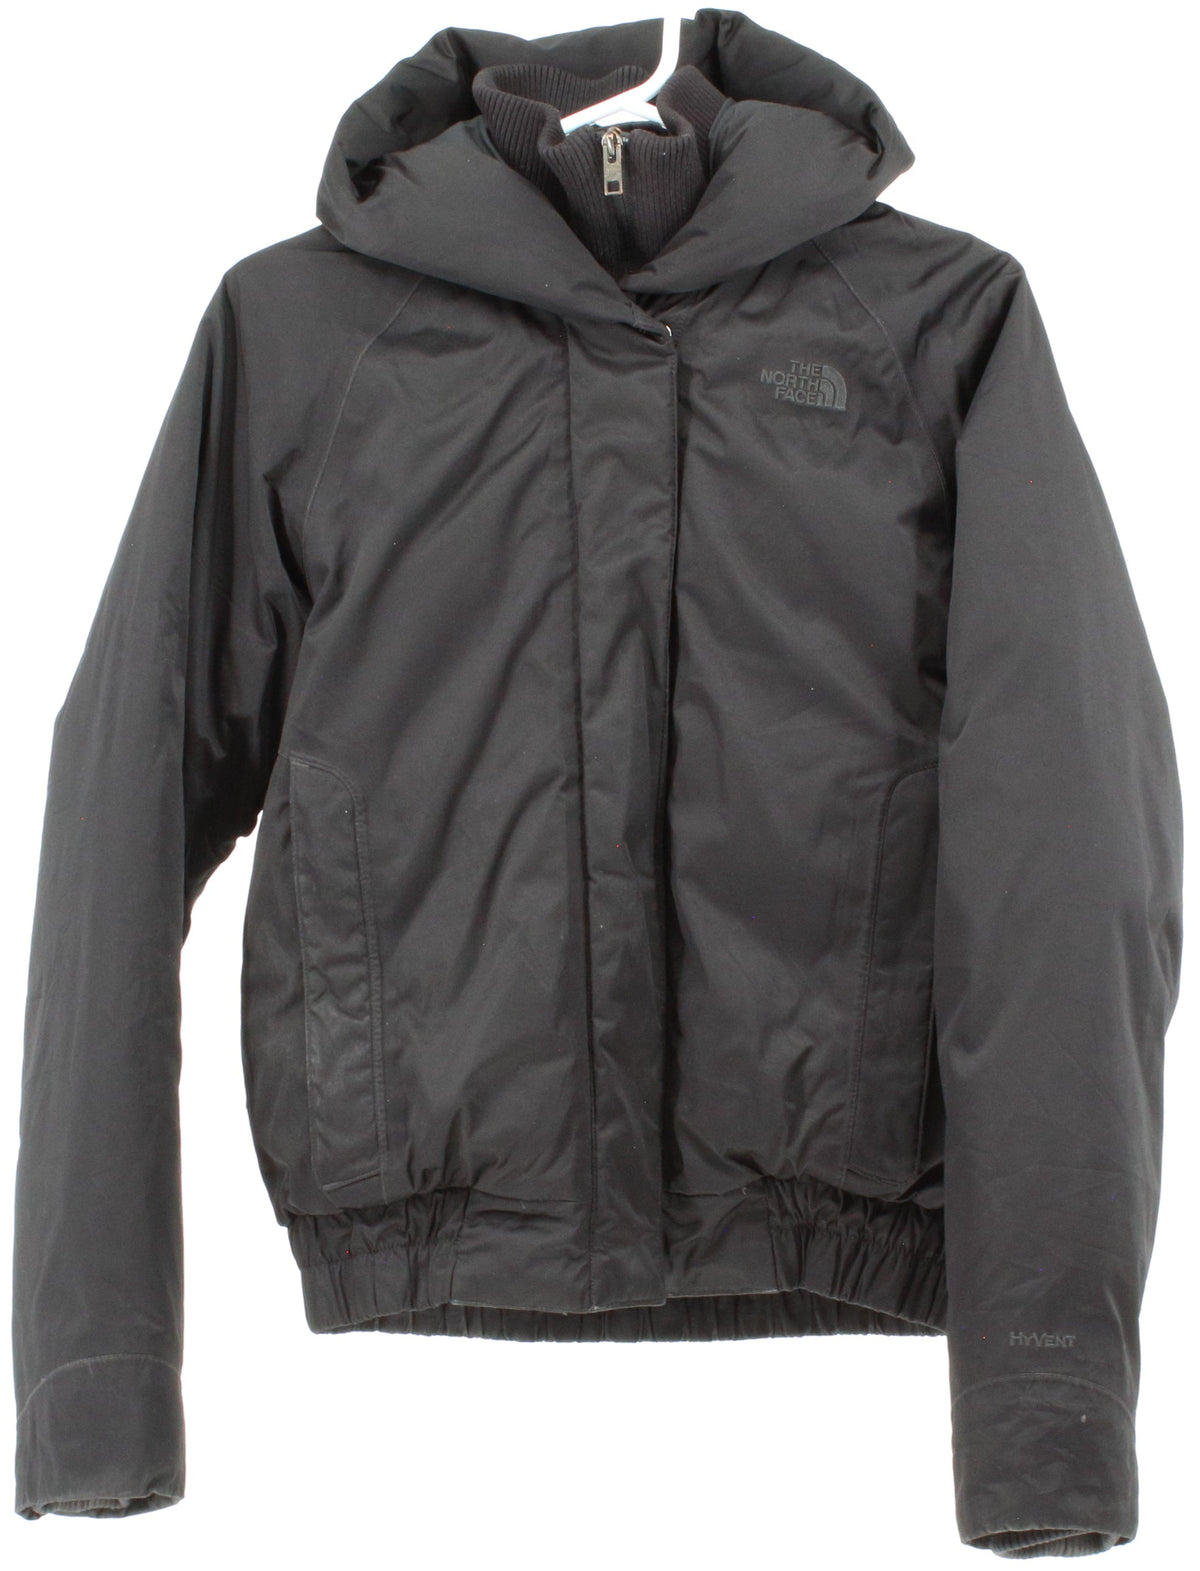 The North Face HyVent Black Hooded Women's Bomber Insulated Jacket